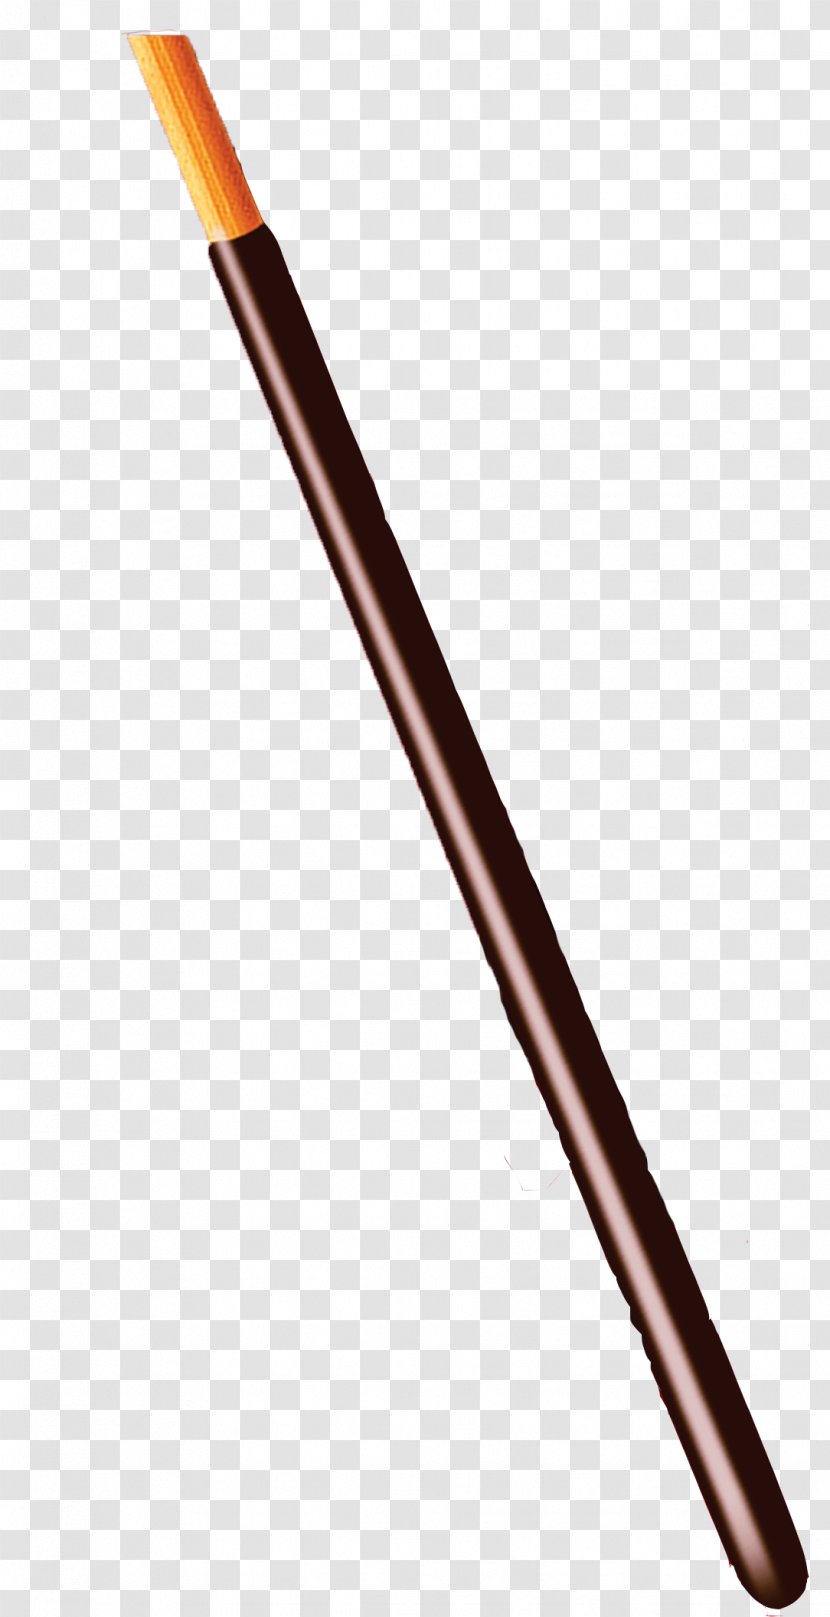 The Wizarding World Of Harry Potter Porpentina Goldstein Wand - Witchcraft - Stick Transparent PNG